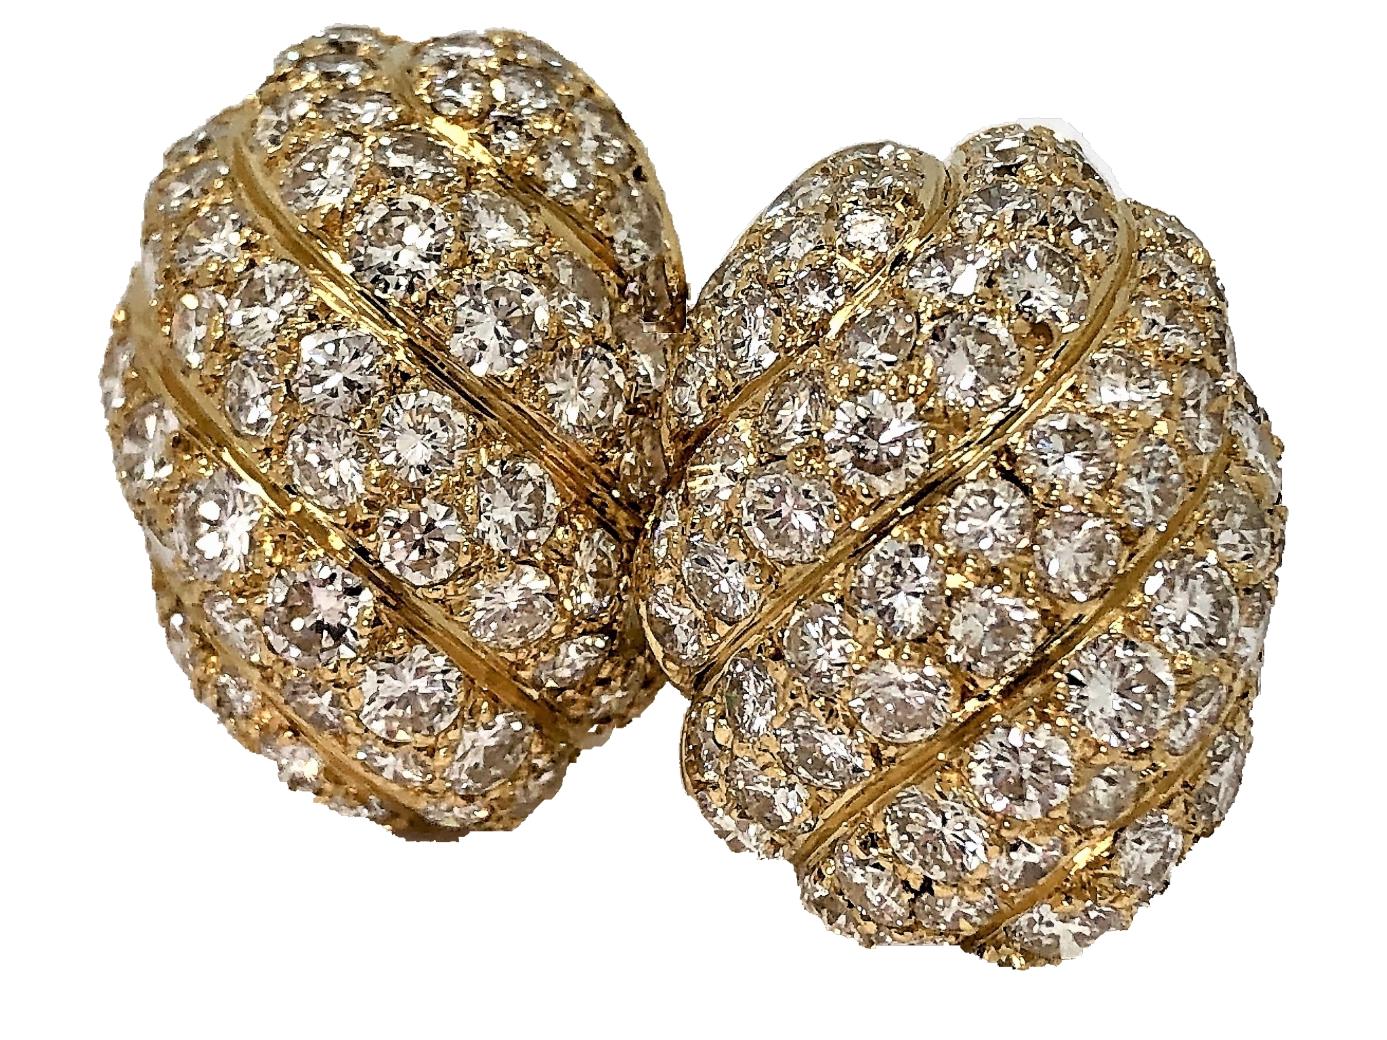 These lovely French, clip on dome earrings made of 18K yellow gold, are set with 
168 round brilliant cut diamonds in a graceful, swirl design. The diamonds weigh 
an approximate total of 6.25CT of overall F/G Color and VS1 Clarity. 
Ideal for the